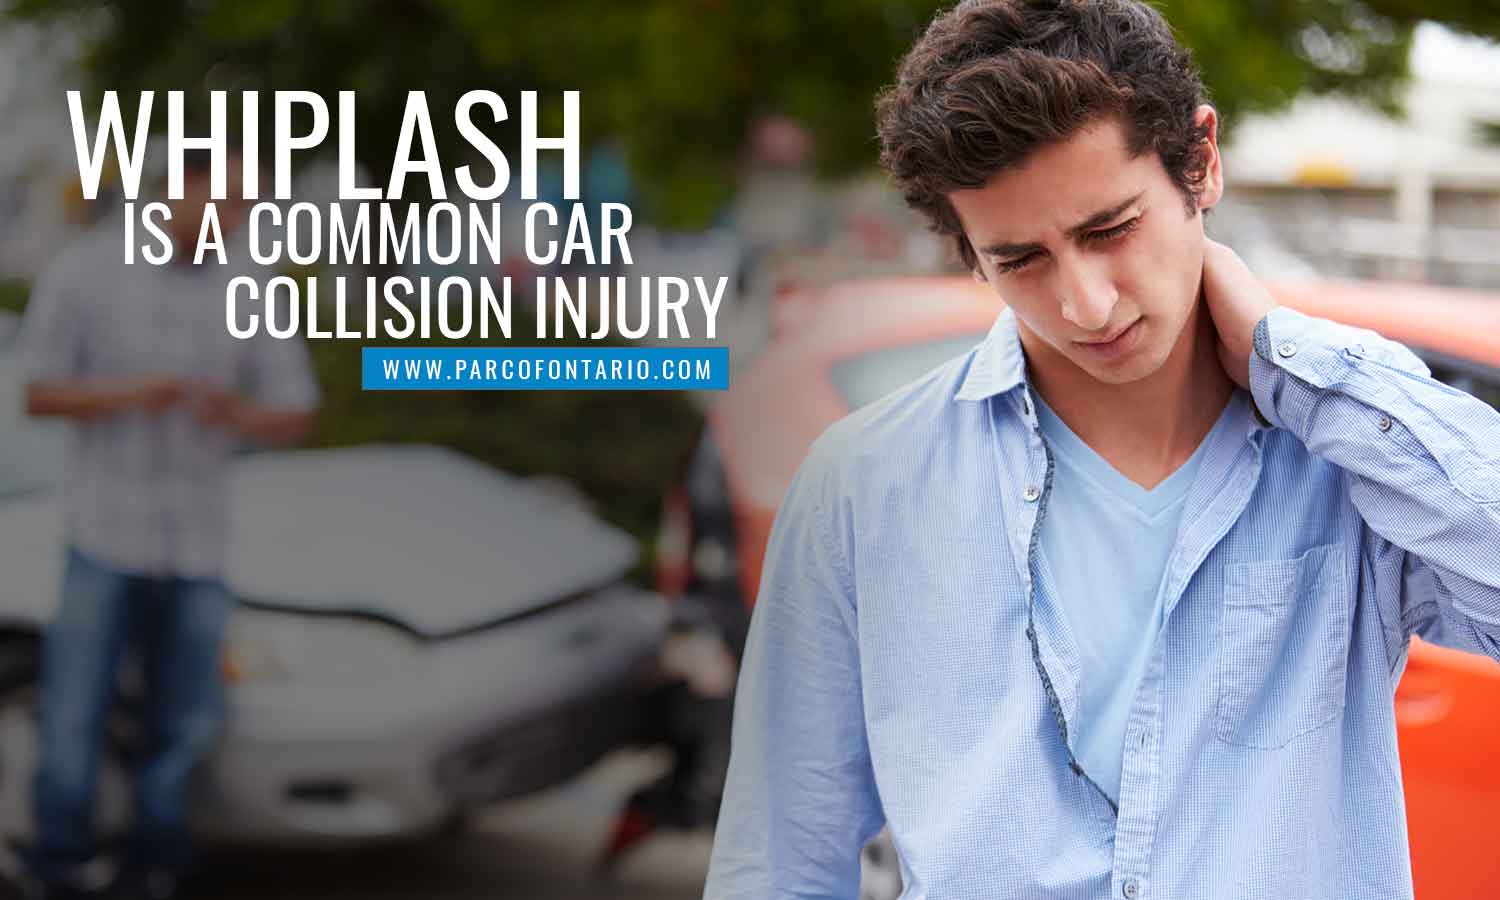 Whiplash is a common car collision injury